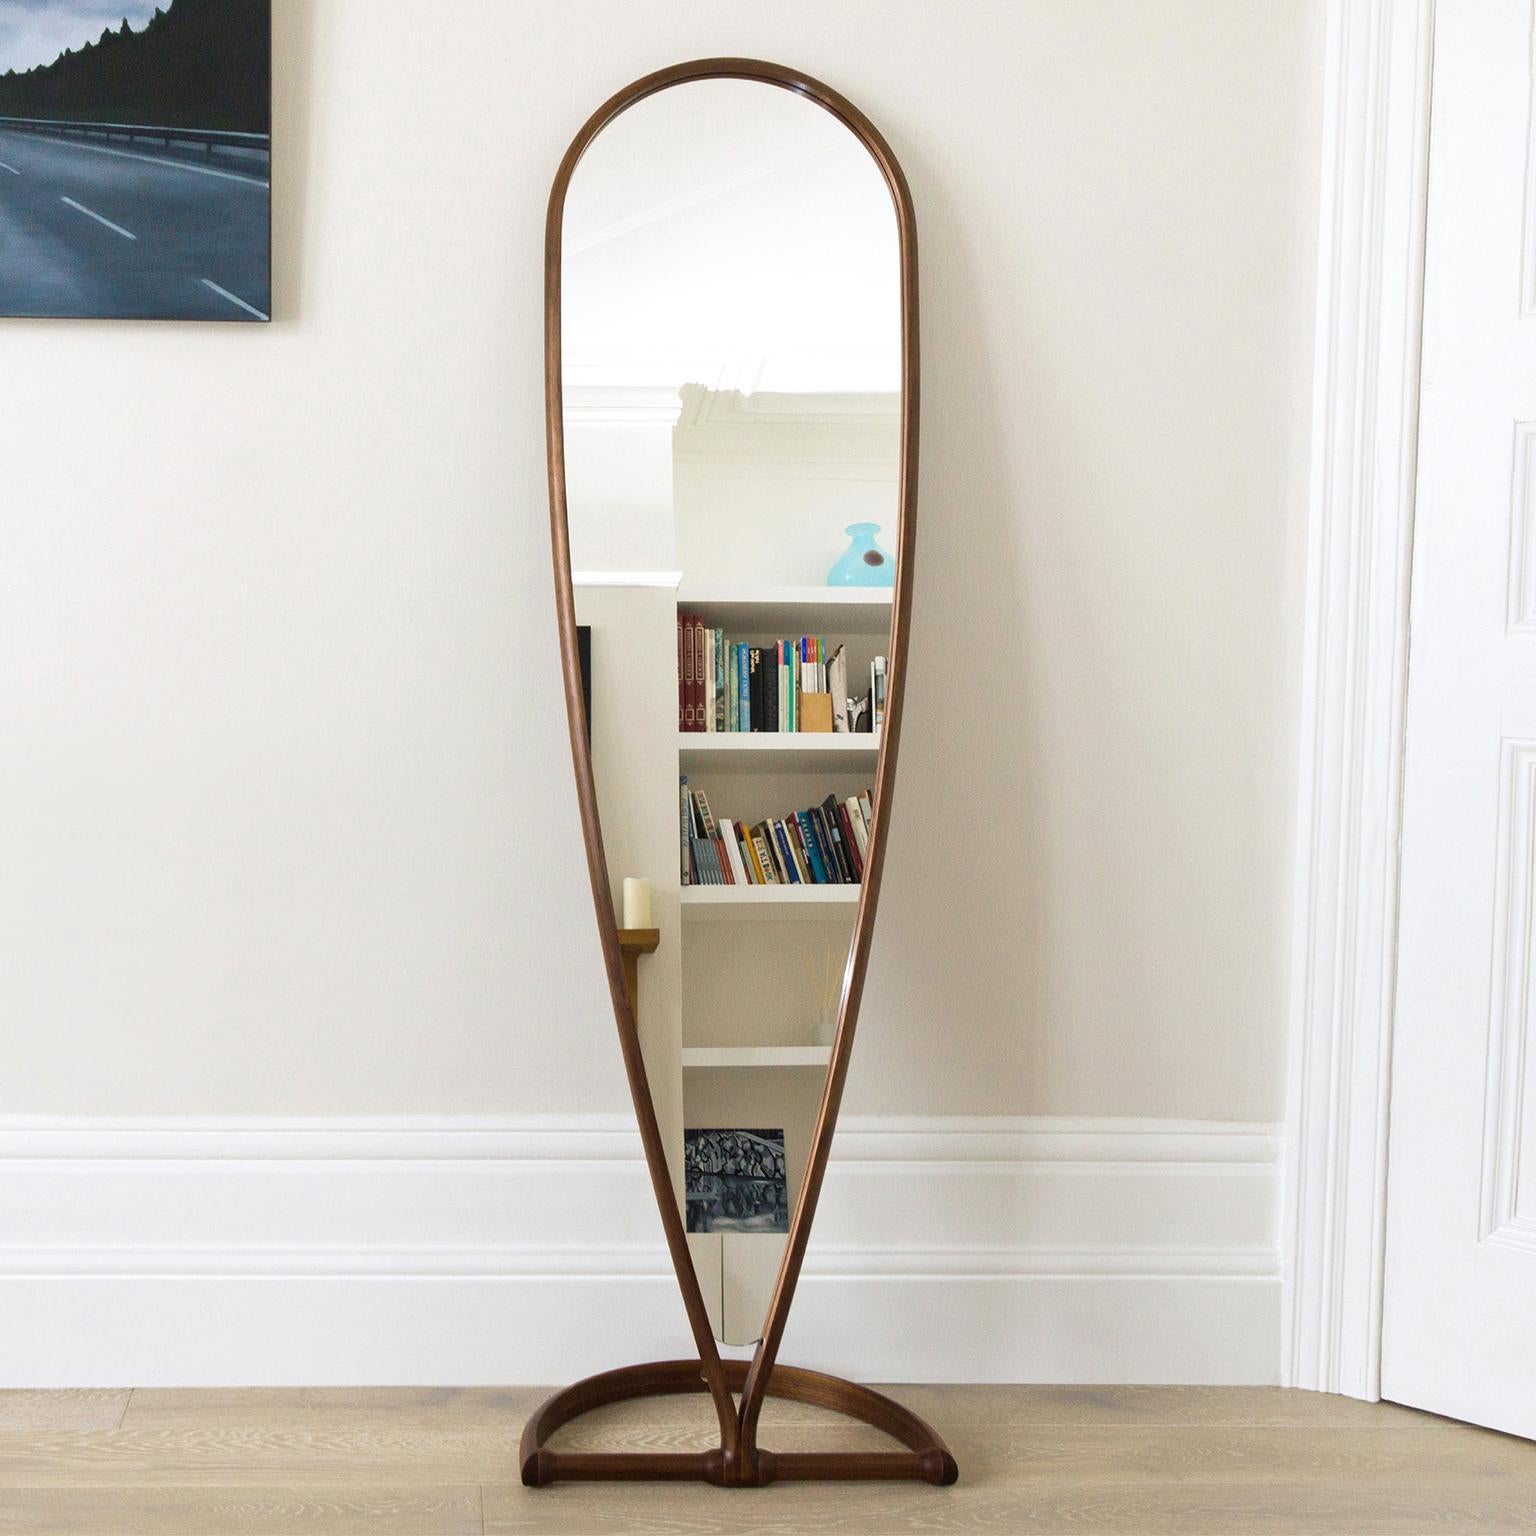 The contemporary full-length ‘Chichester Mirror’ has a beautiful, inverted tear-drop frame made from one continuous length of Walnut timber. The frame and base join together on a rotating swivel joint that allows the mirror to lean against the wall